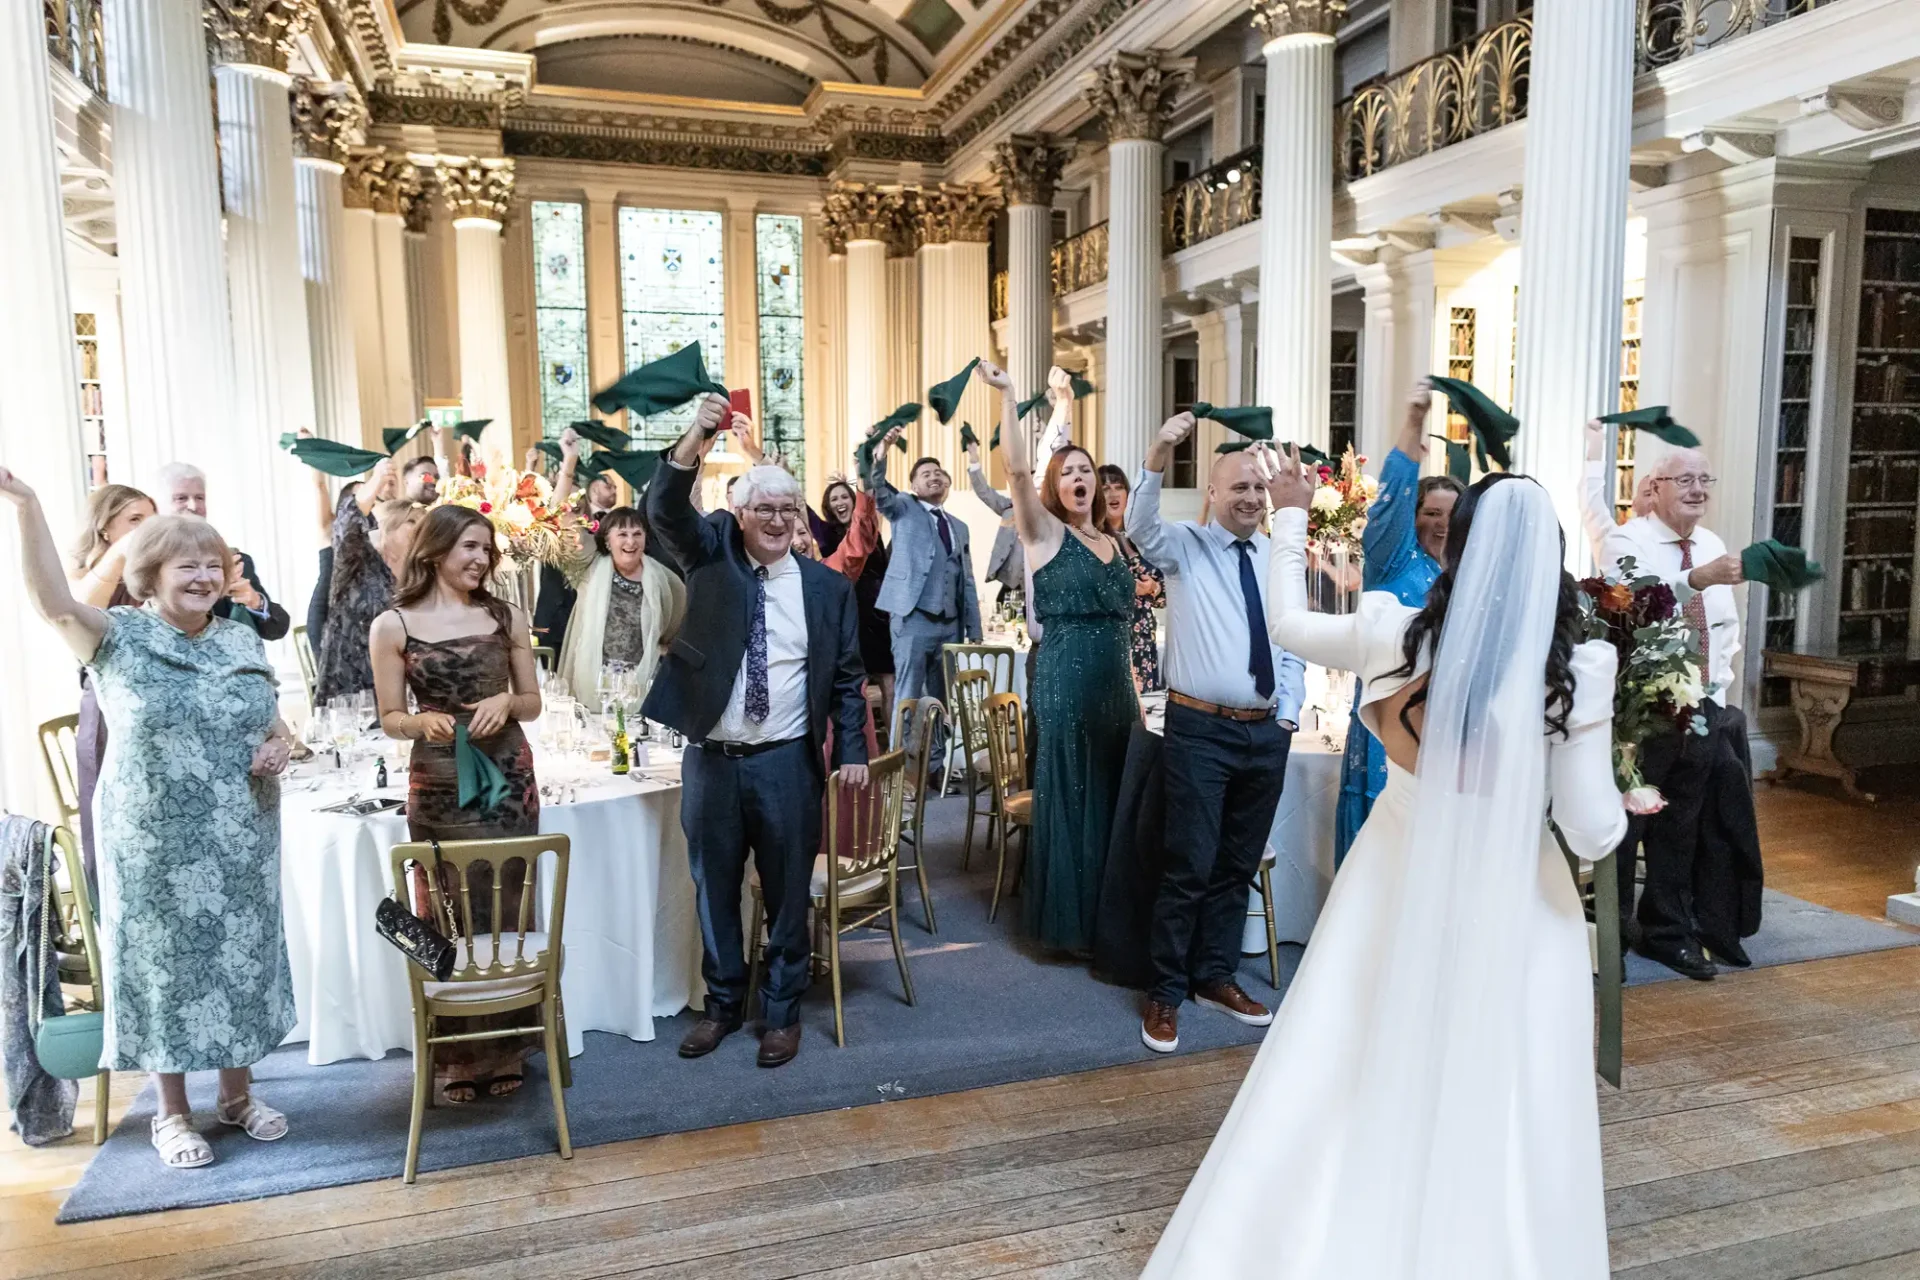 Wedding guests cheer and wave napkins as a happy couple walks down the aisle in a grand, ornately decorated hall.